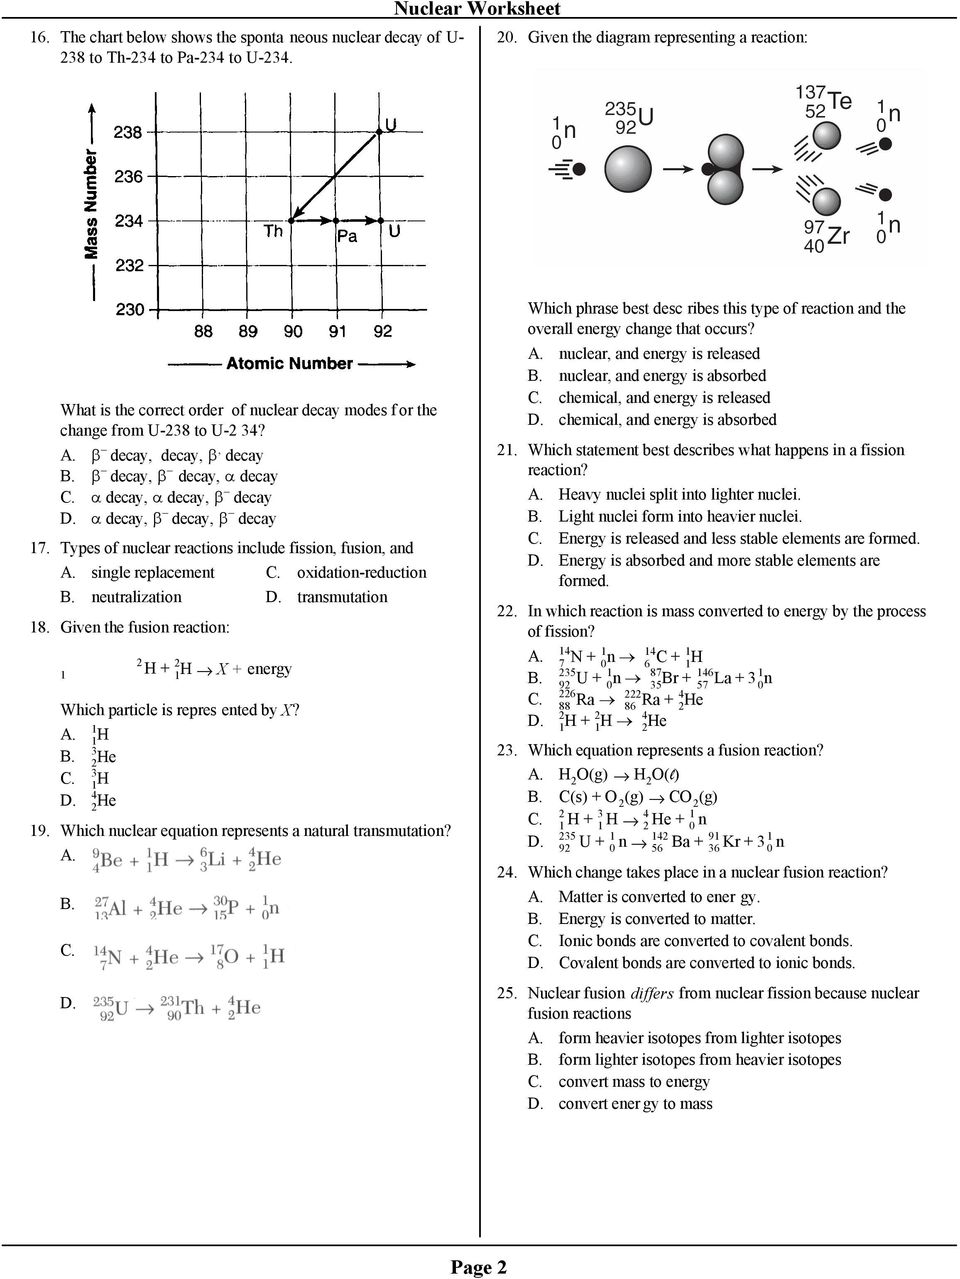 Regents Review Nuclear Worksheet Mr. Beauchamp - PDF Free Download Regarding Nuclear Decay Worksheet Answers Key